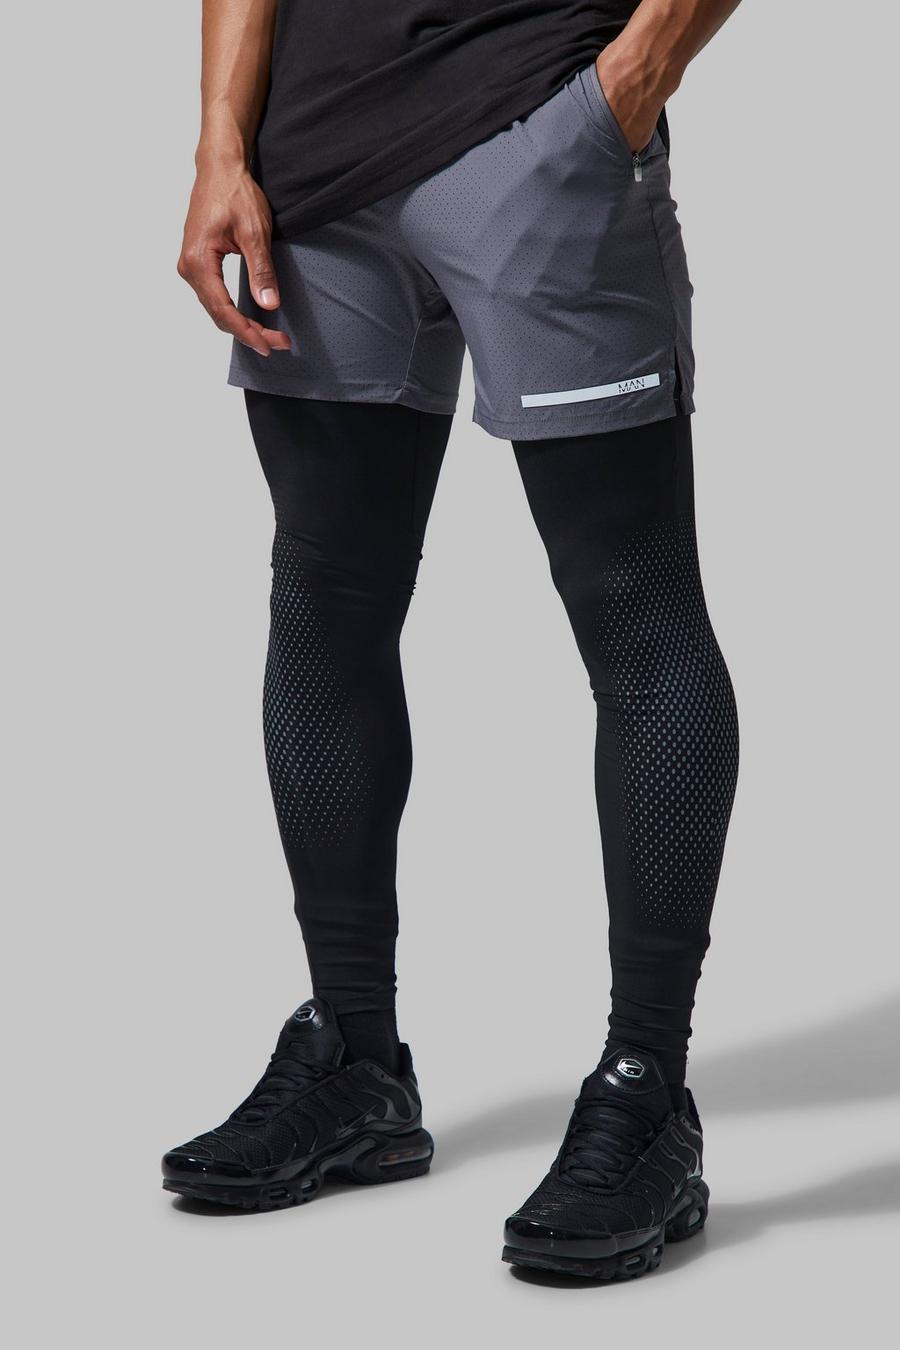 Charcoal gris Man Active Performance 2 In 1 Leggings